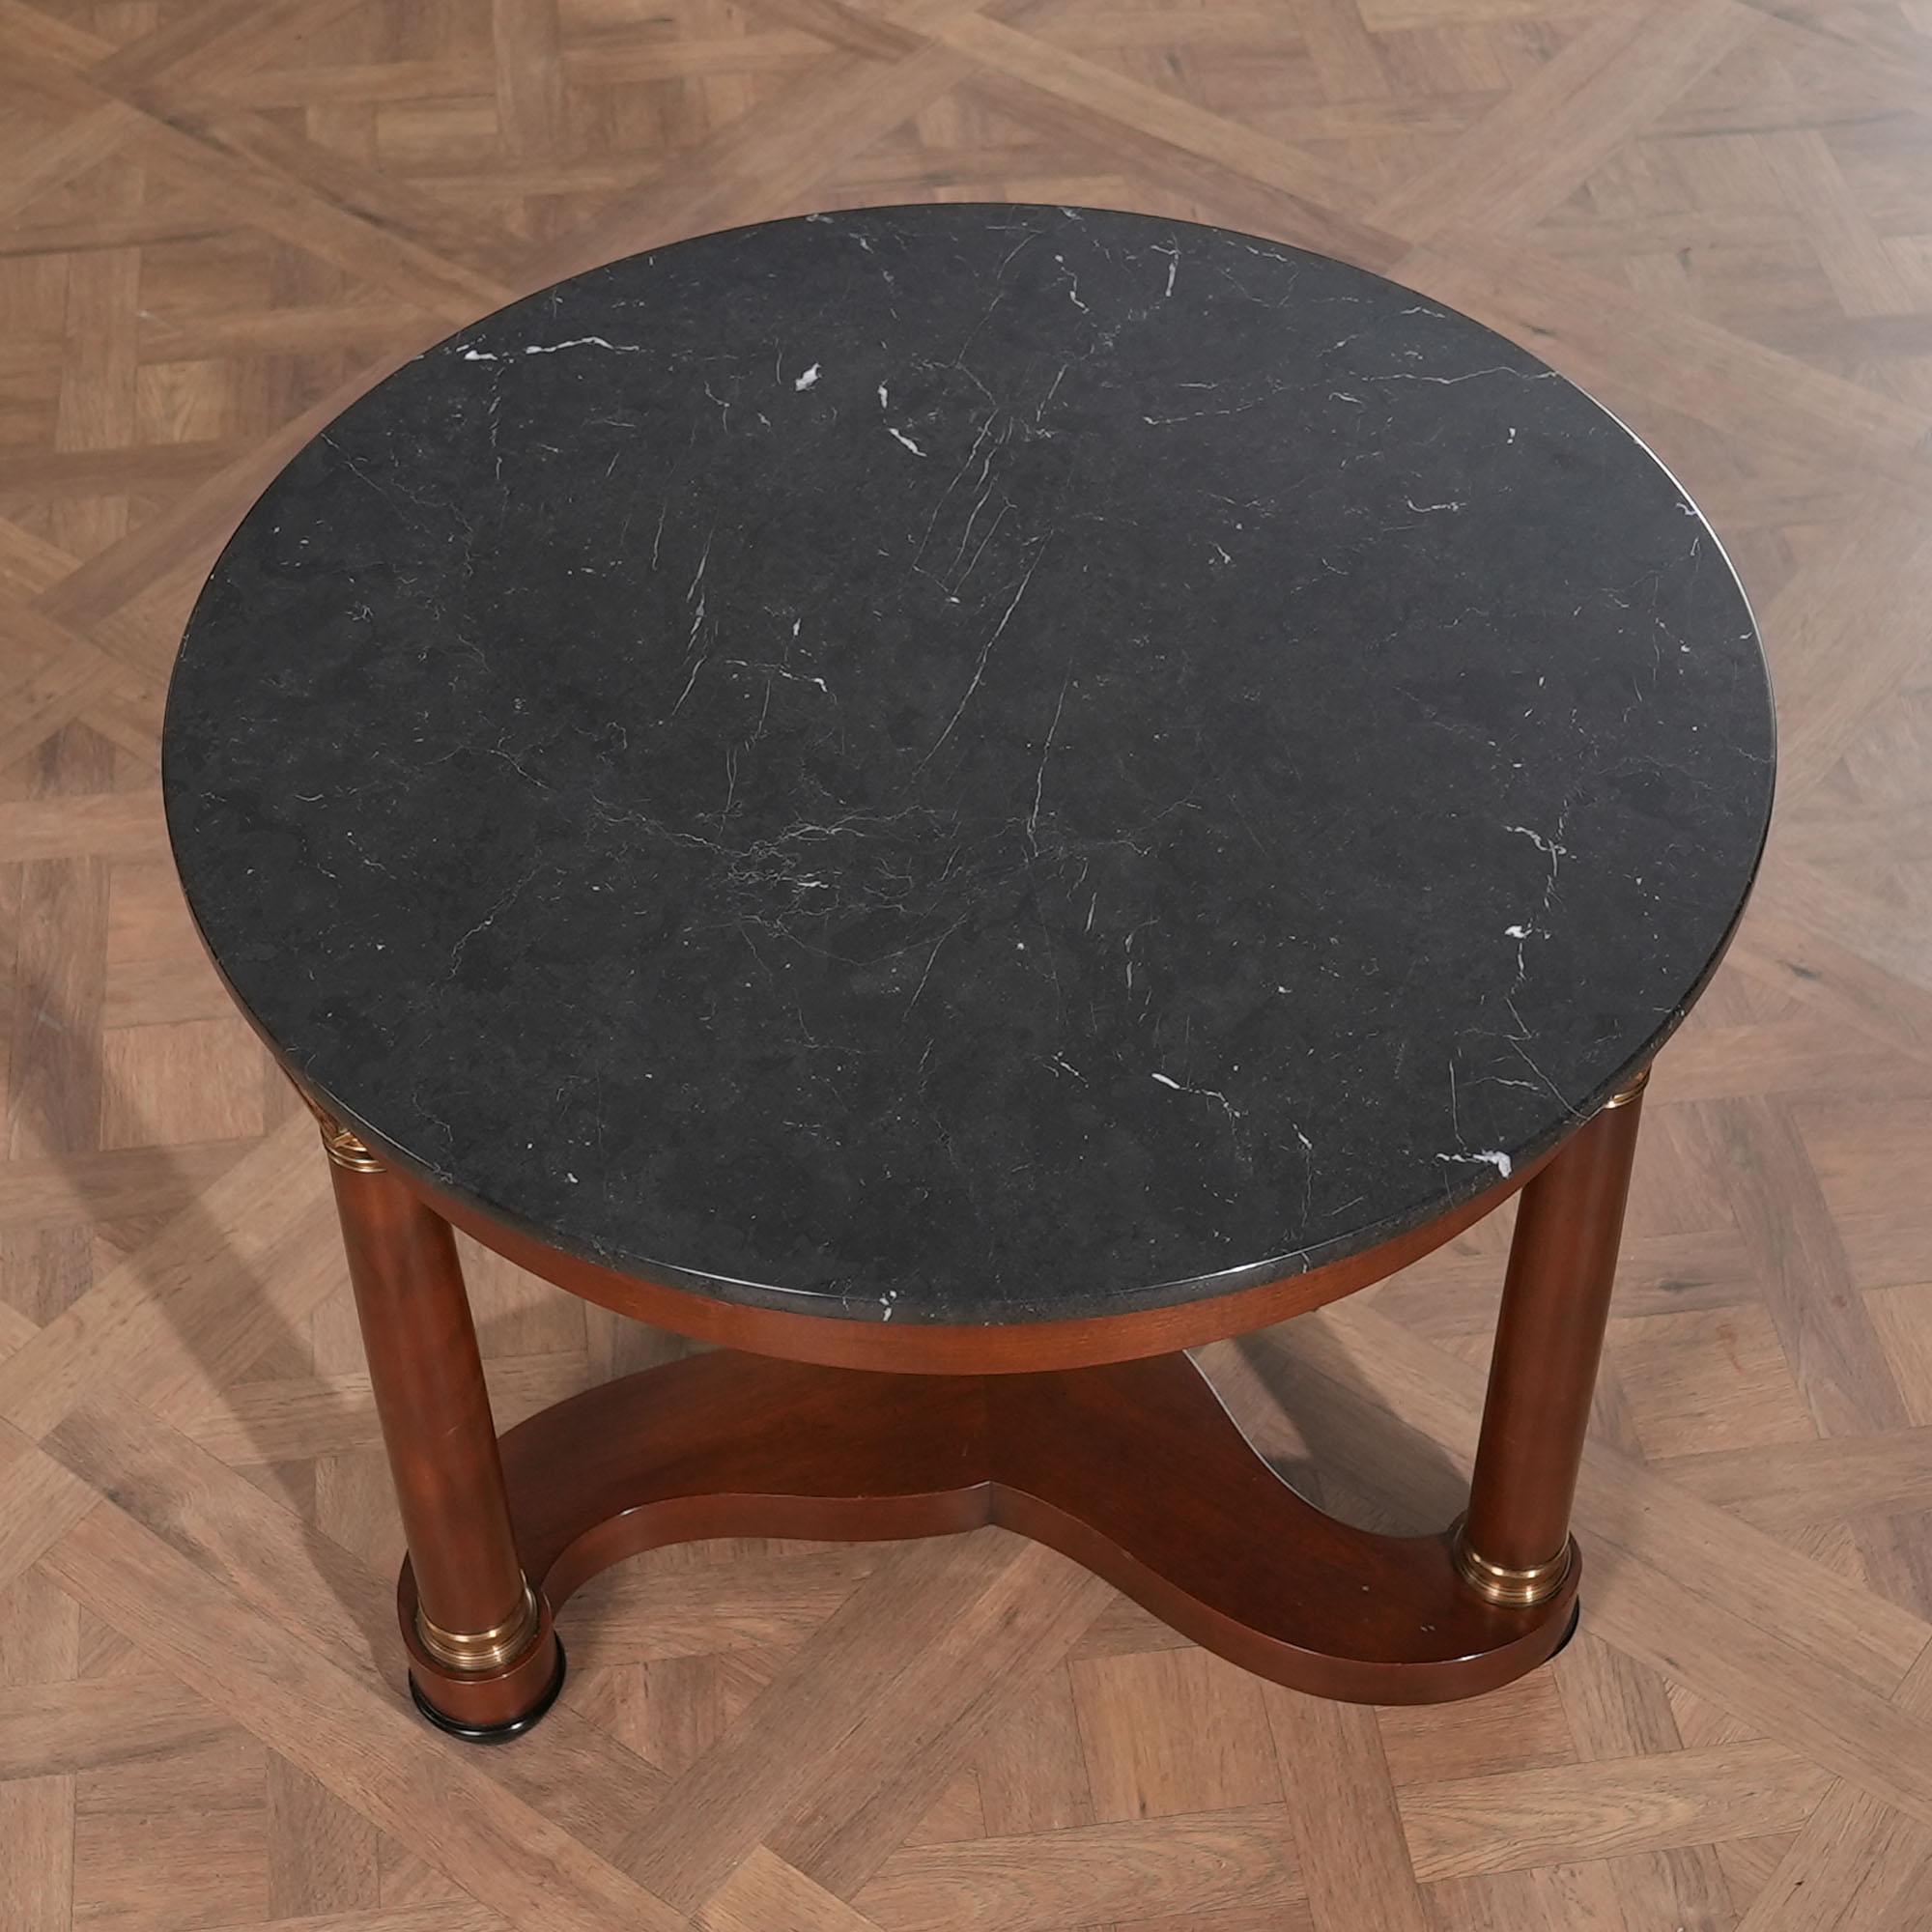 A Vintage Baker Round Table which will be the focal point of any room in which it is placed. From the beautiful marble top to the sturdy and lovely turned columns and down to the mesmerizing center stretcher this table has all of the standout